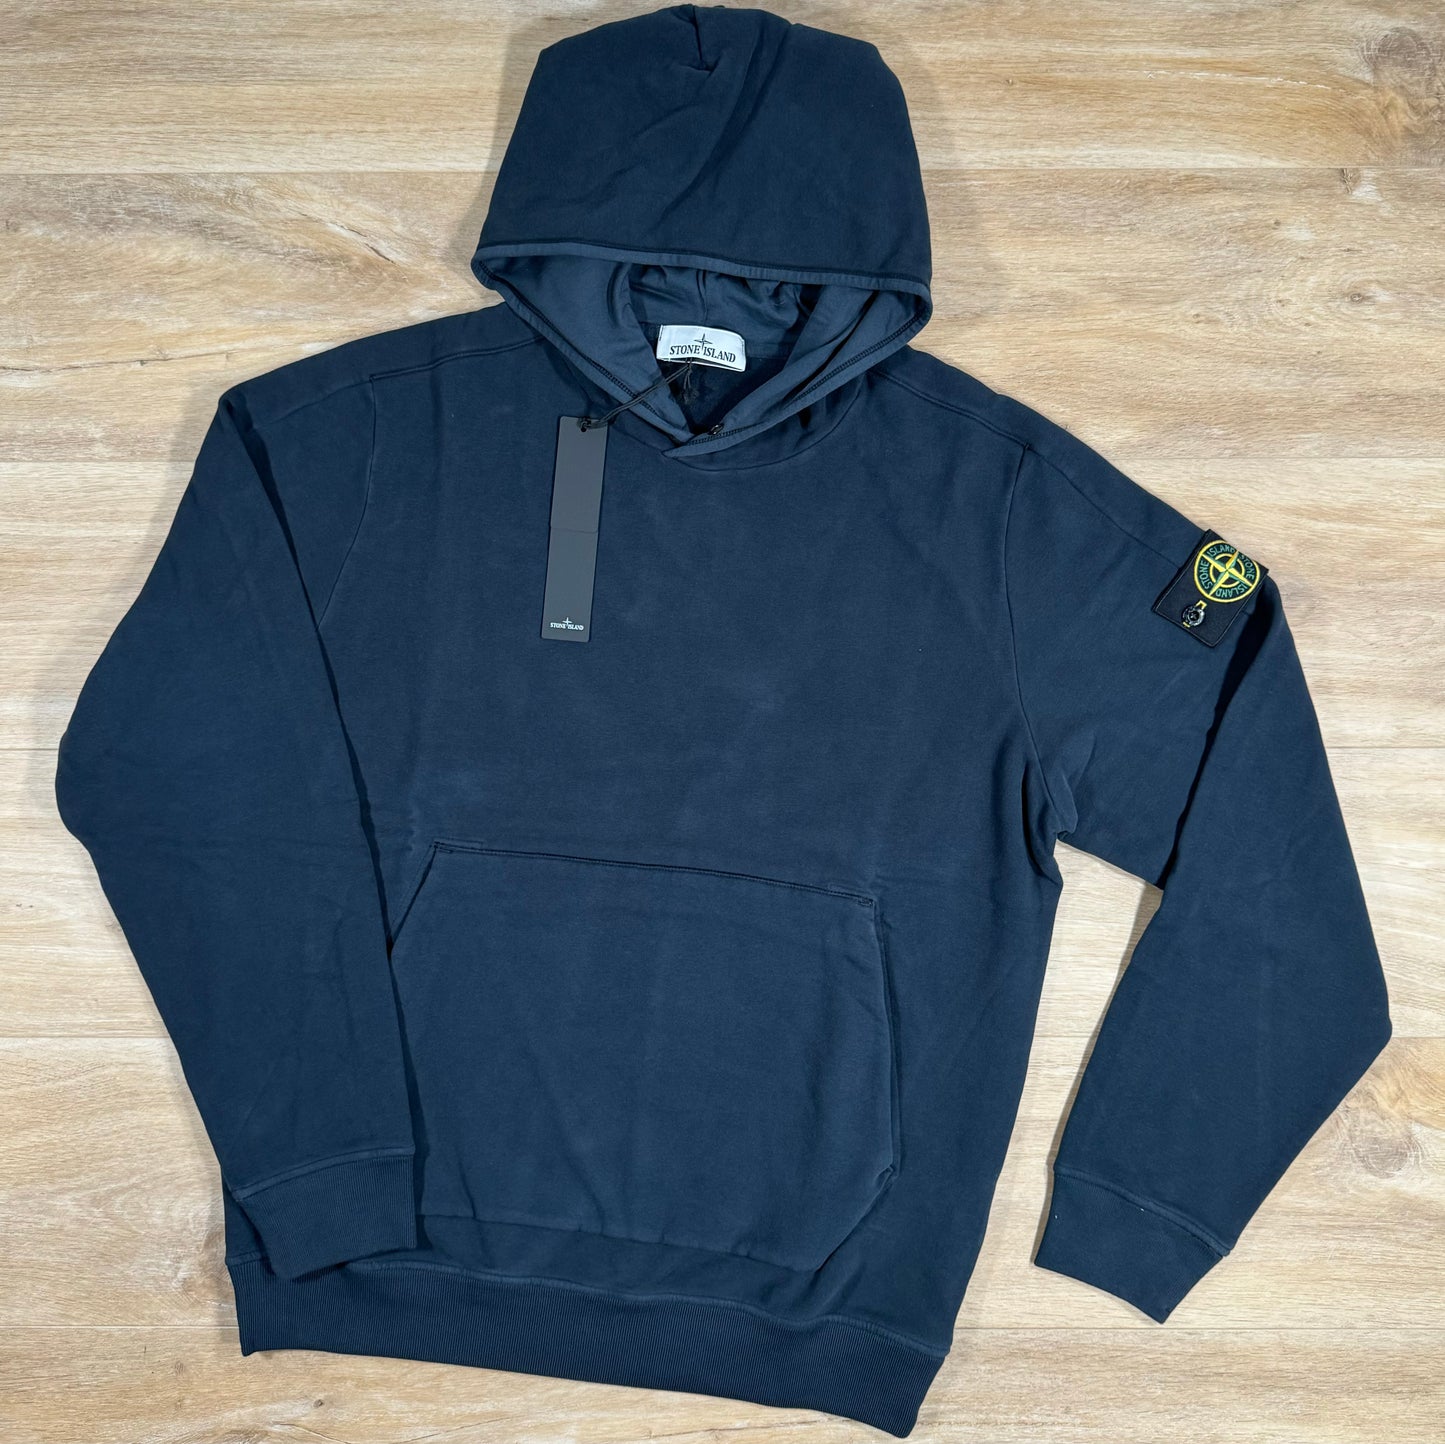 Stone Island Stretch Cotton Hoodie in Navy